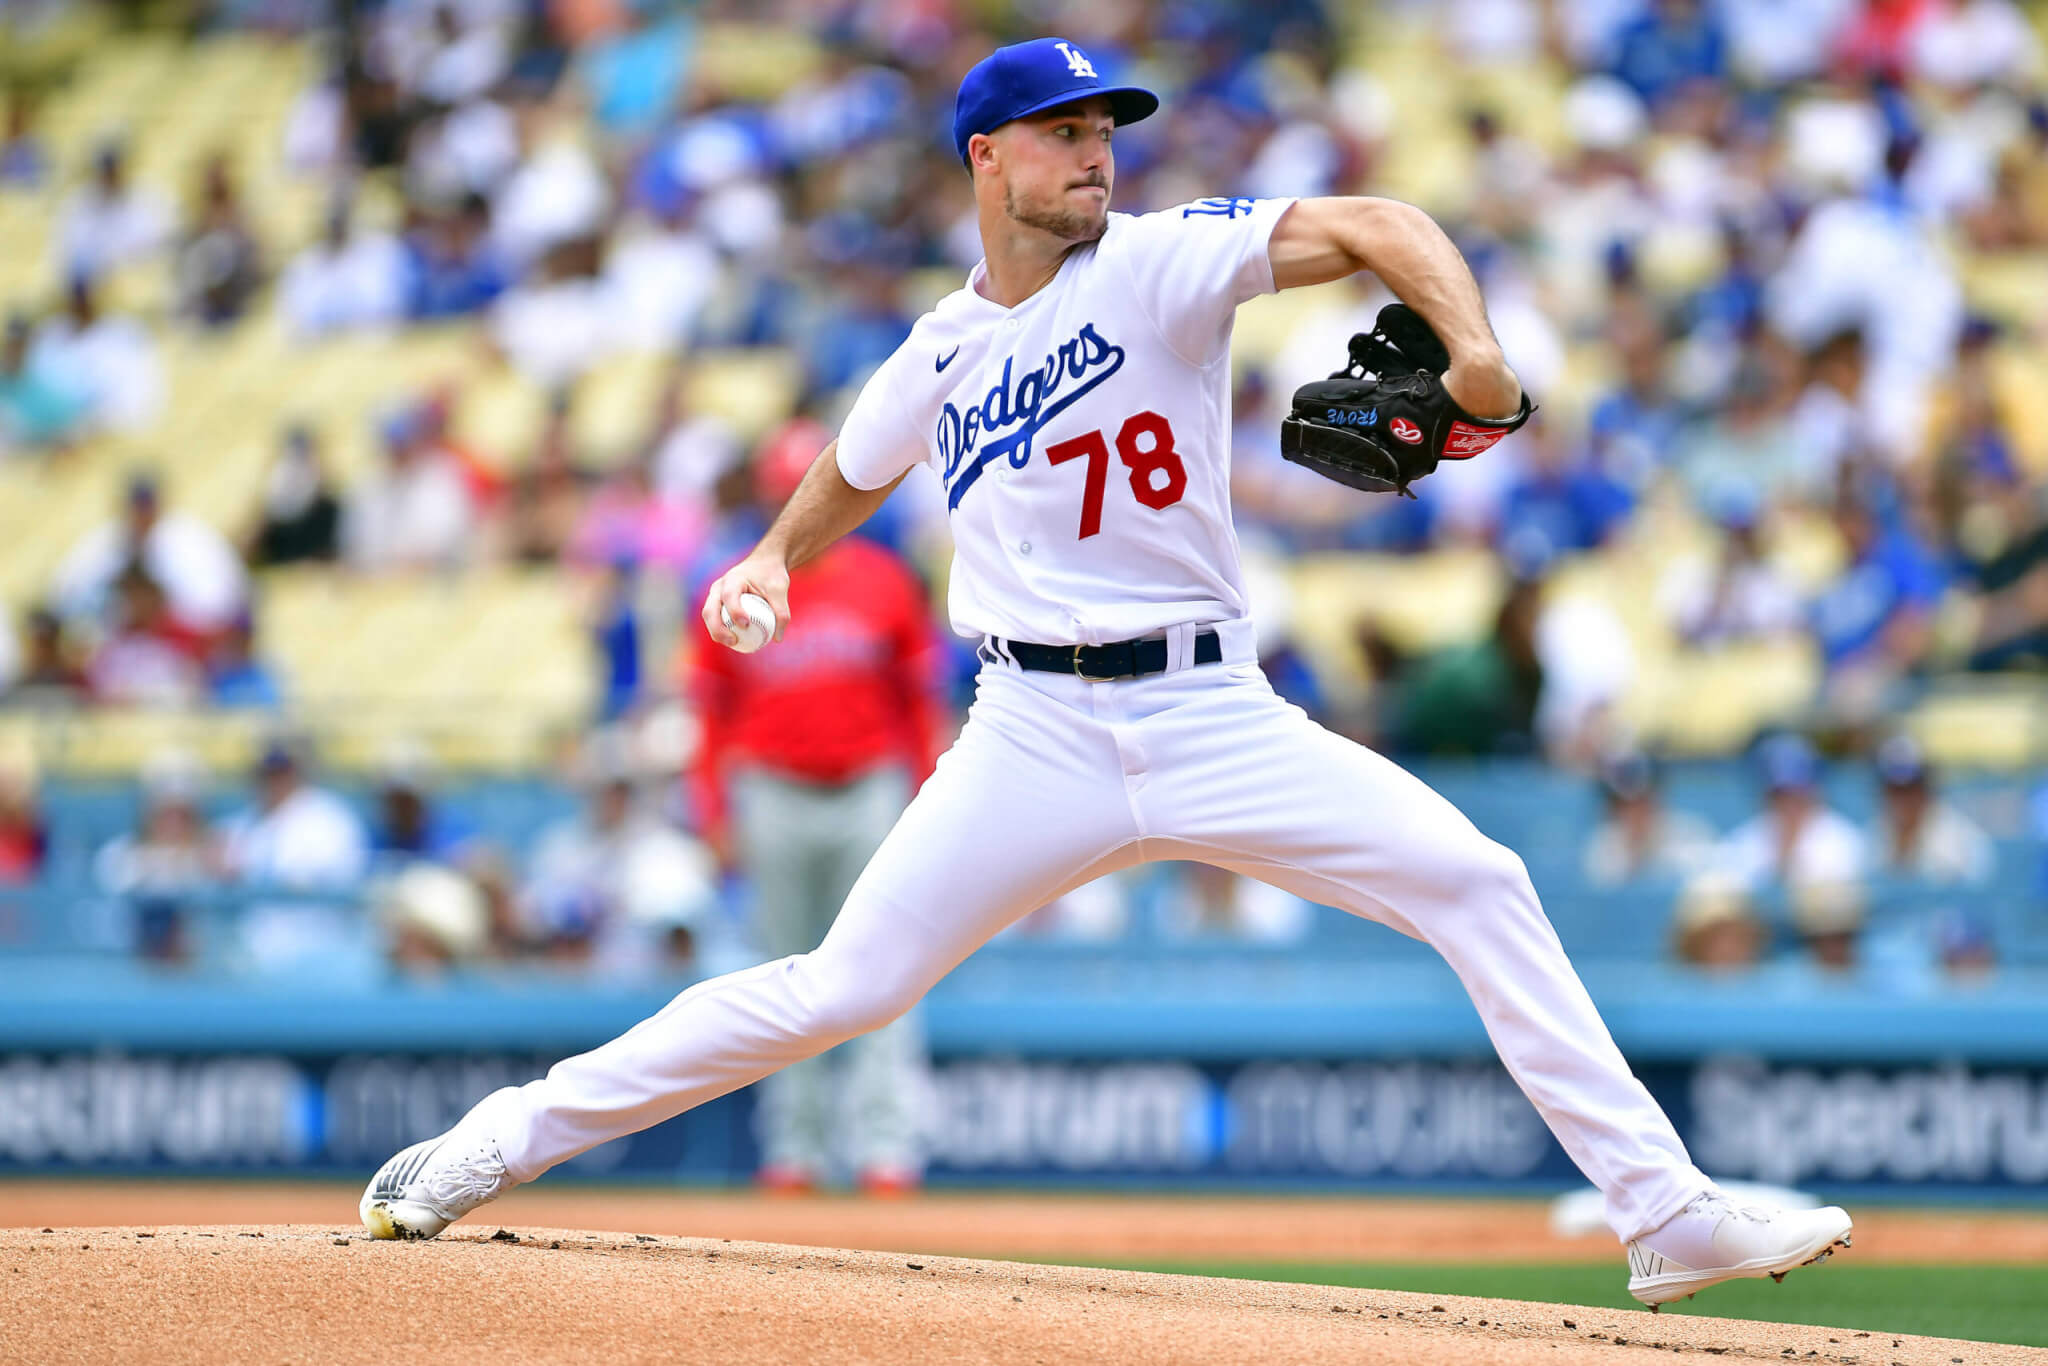 Drillers Announce Clayton Kershaw Jersey Night